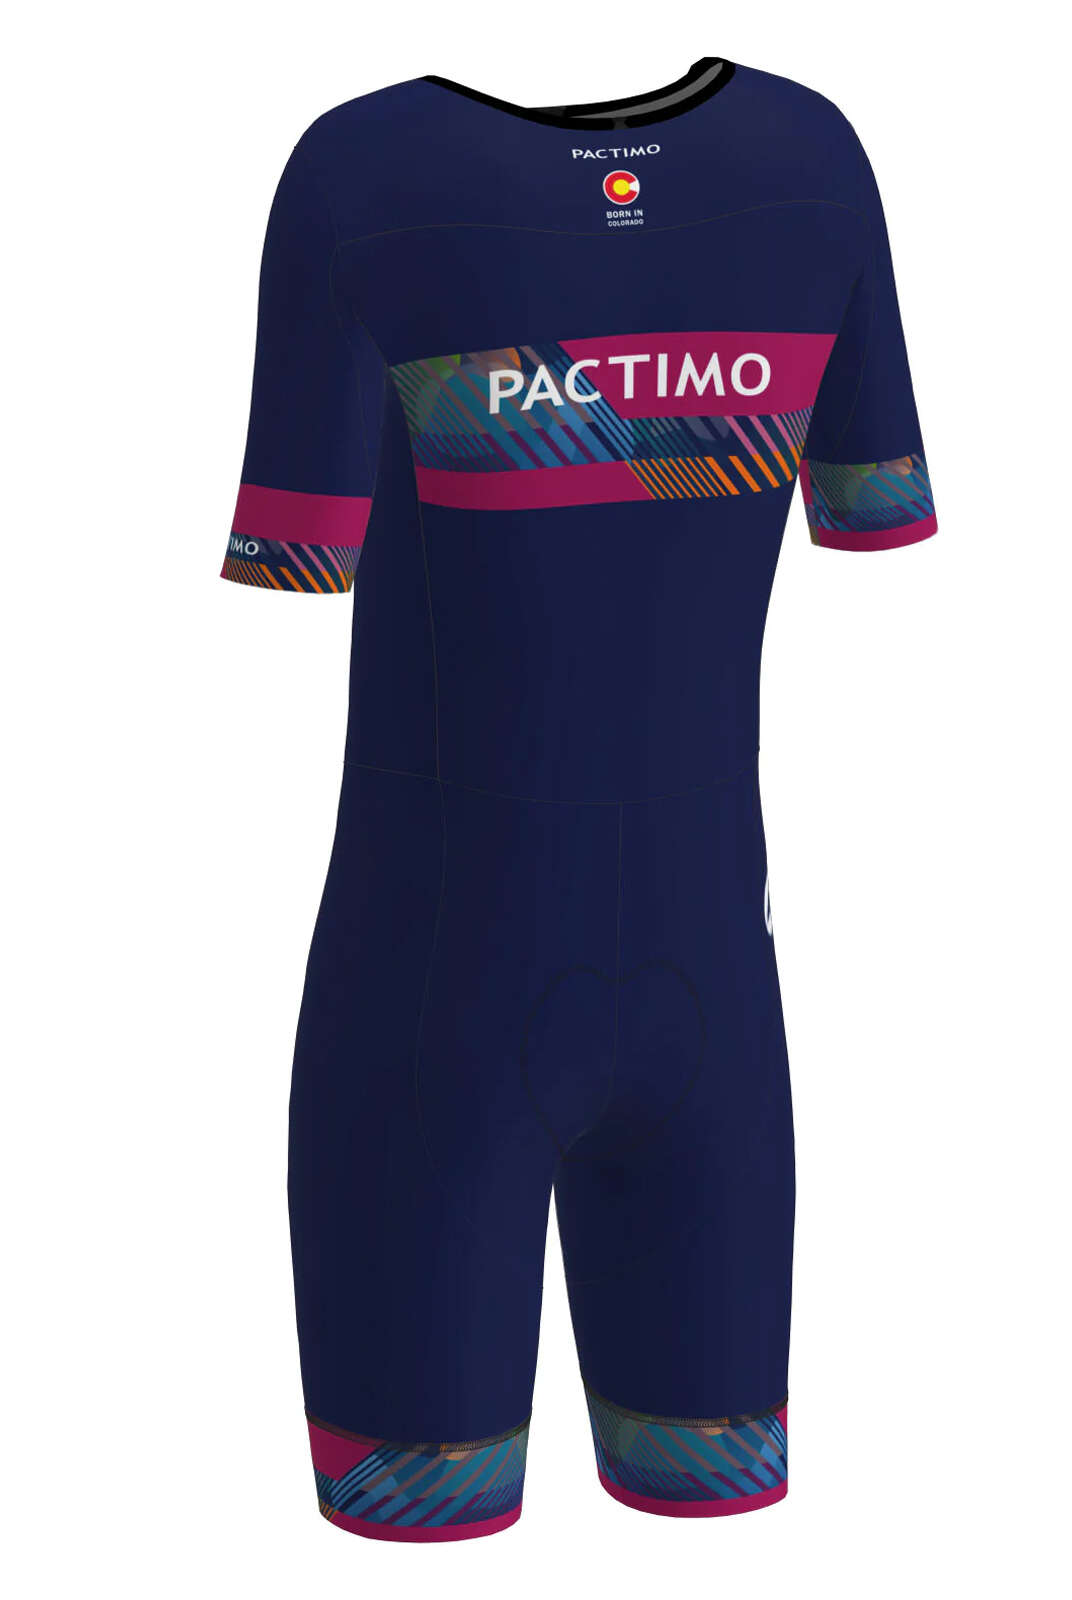 Men's Fully Printable Custom Cycling Skinsuit - Short Sleeve Back View #color-options_fully-printed